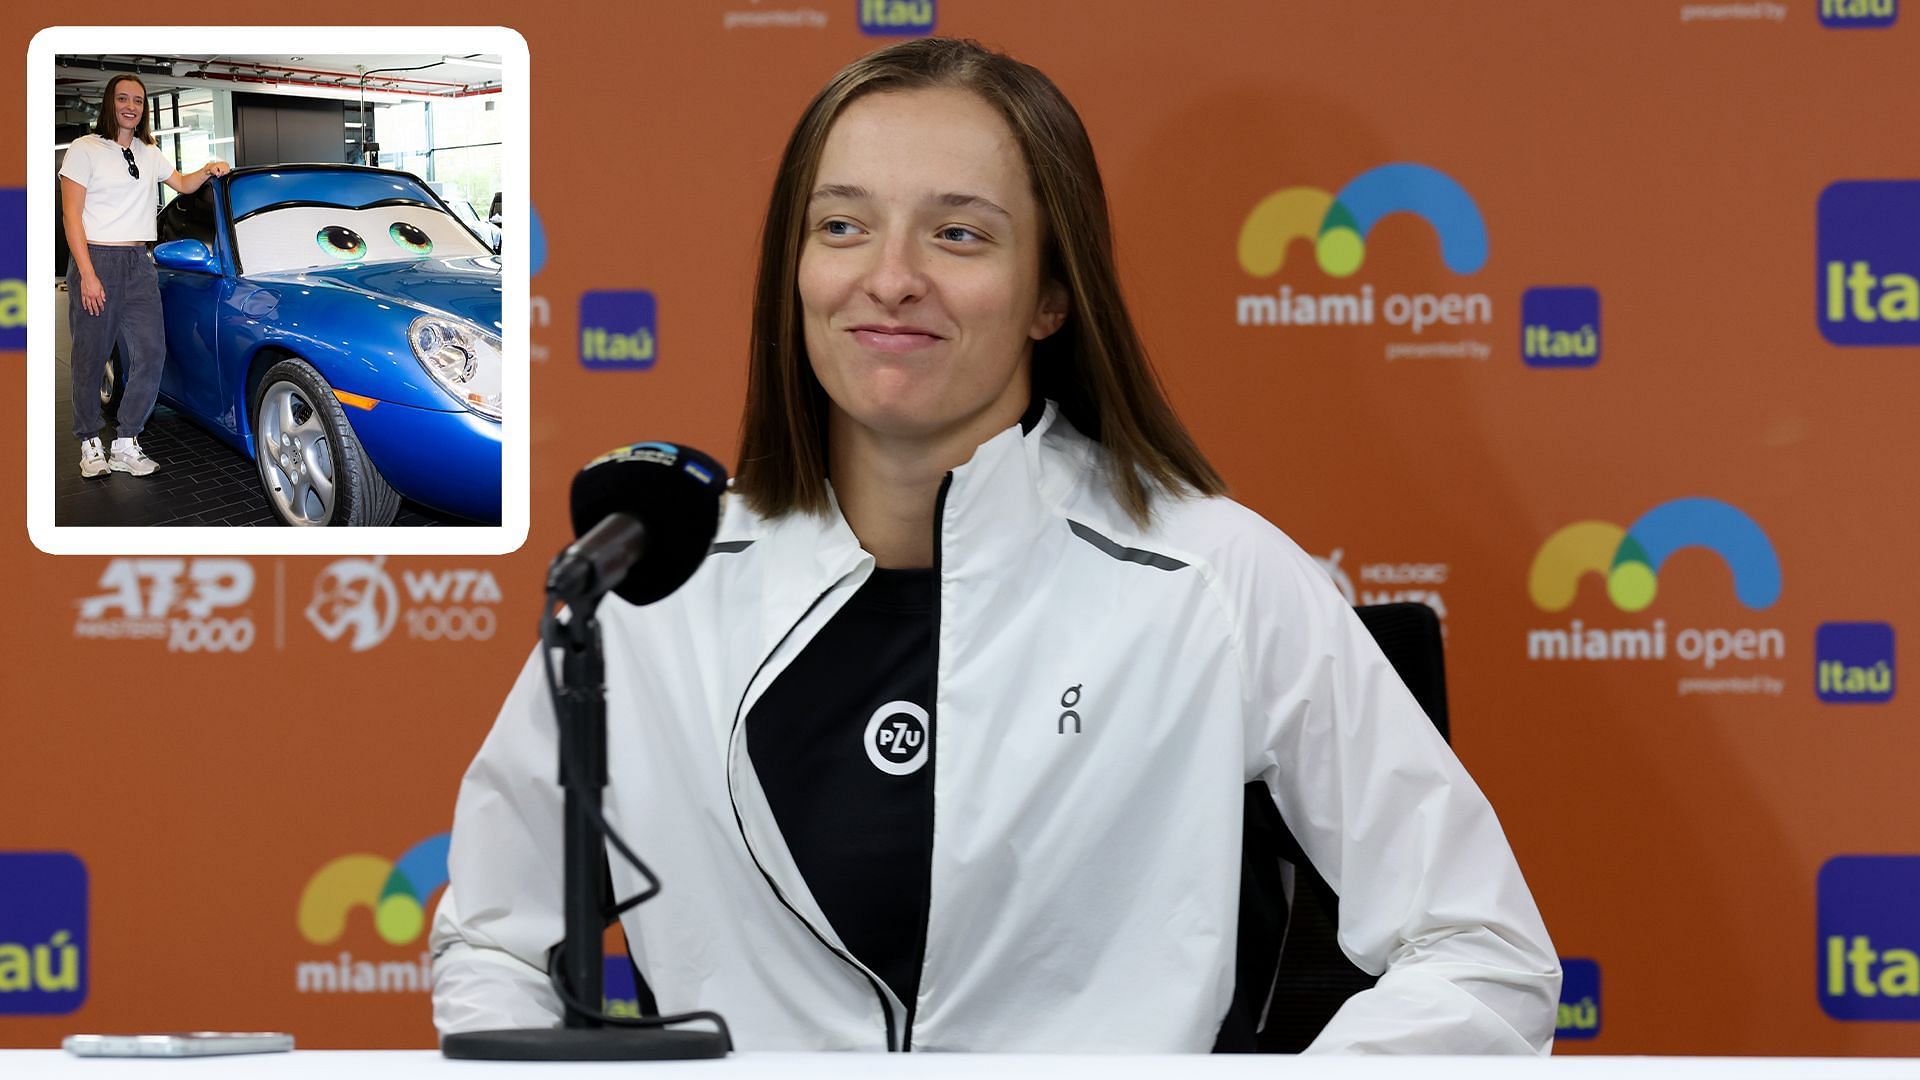 Iga Swiatek at the Miami Open(center) and posing with a Porsche car(inset)